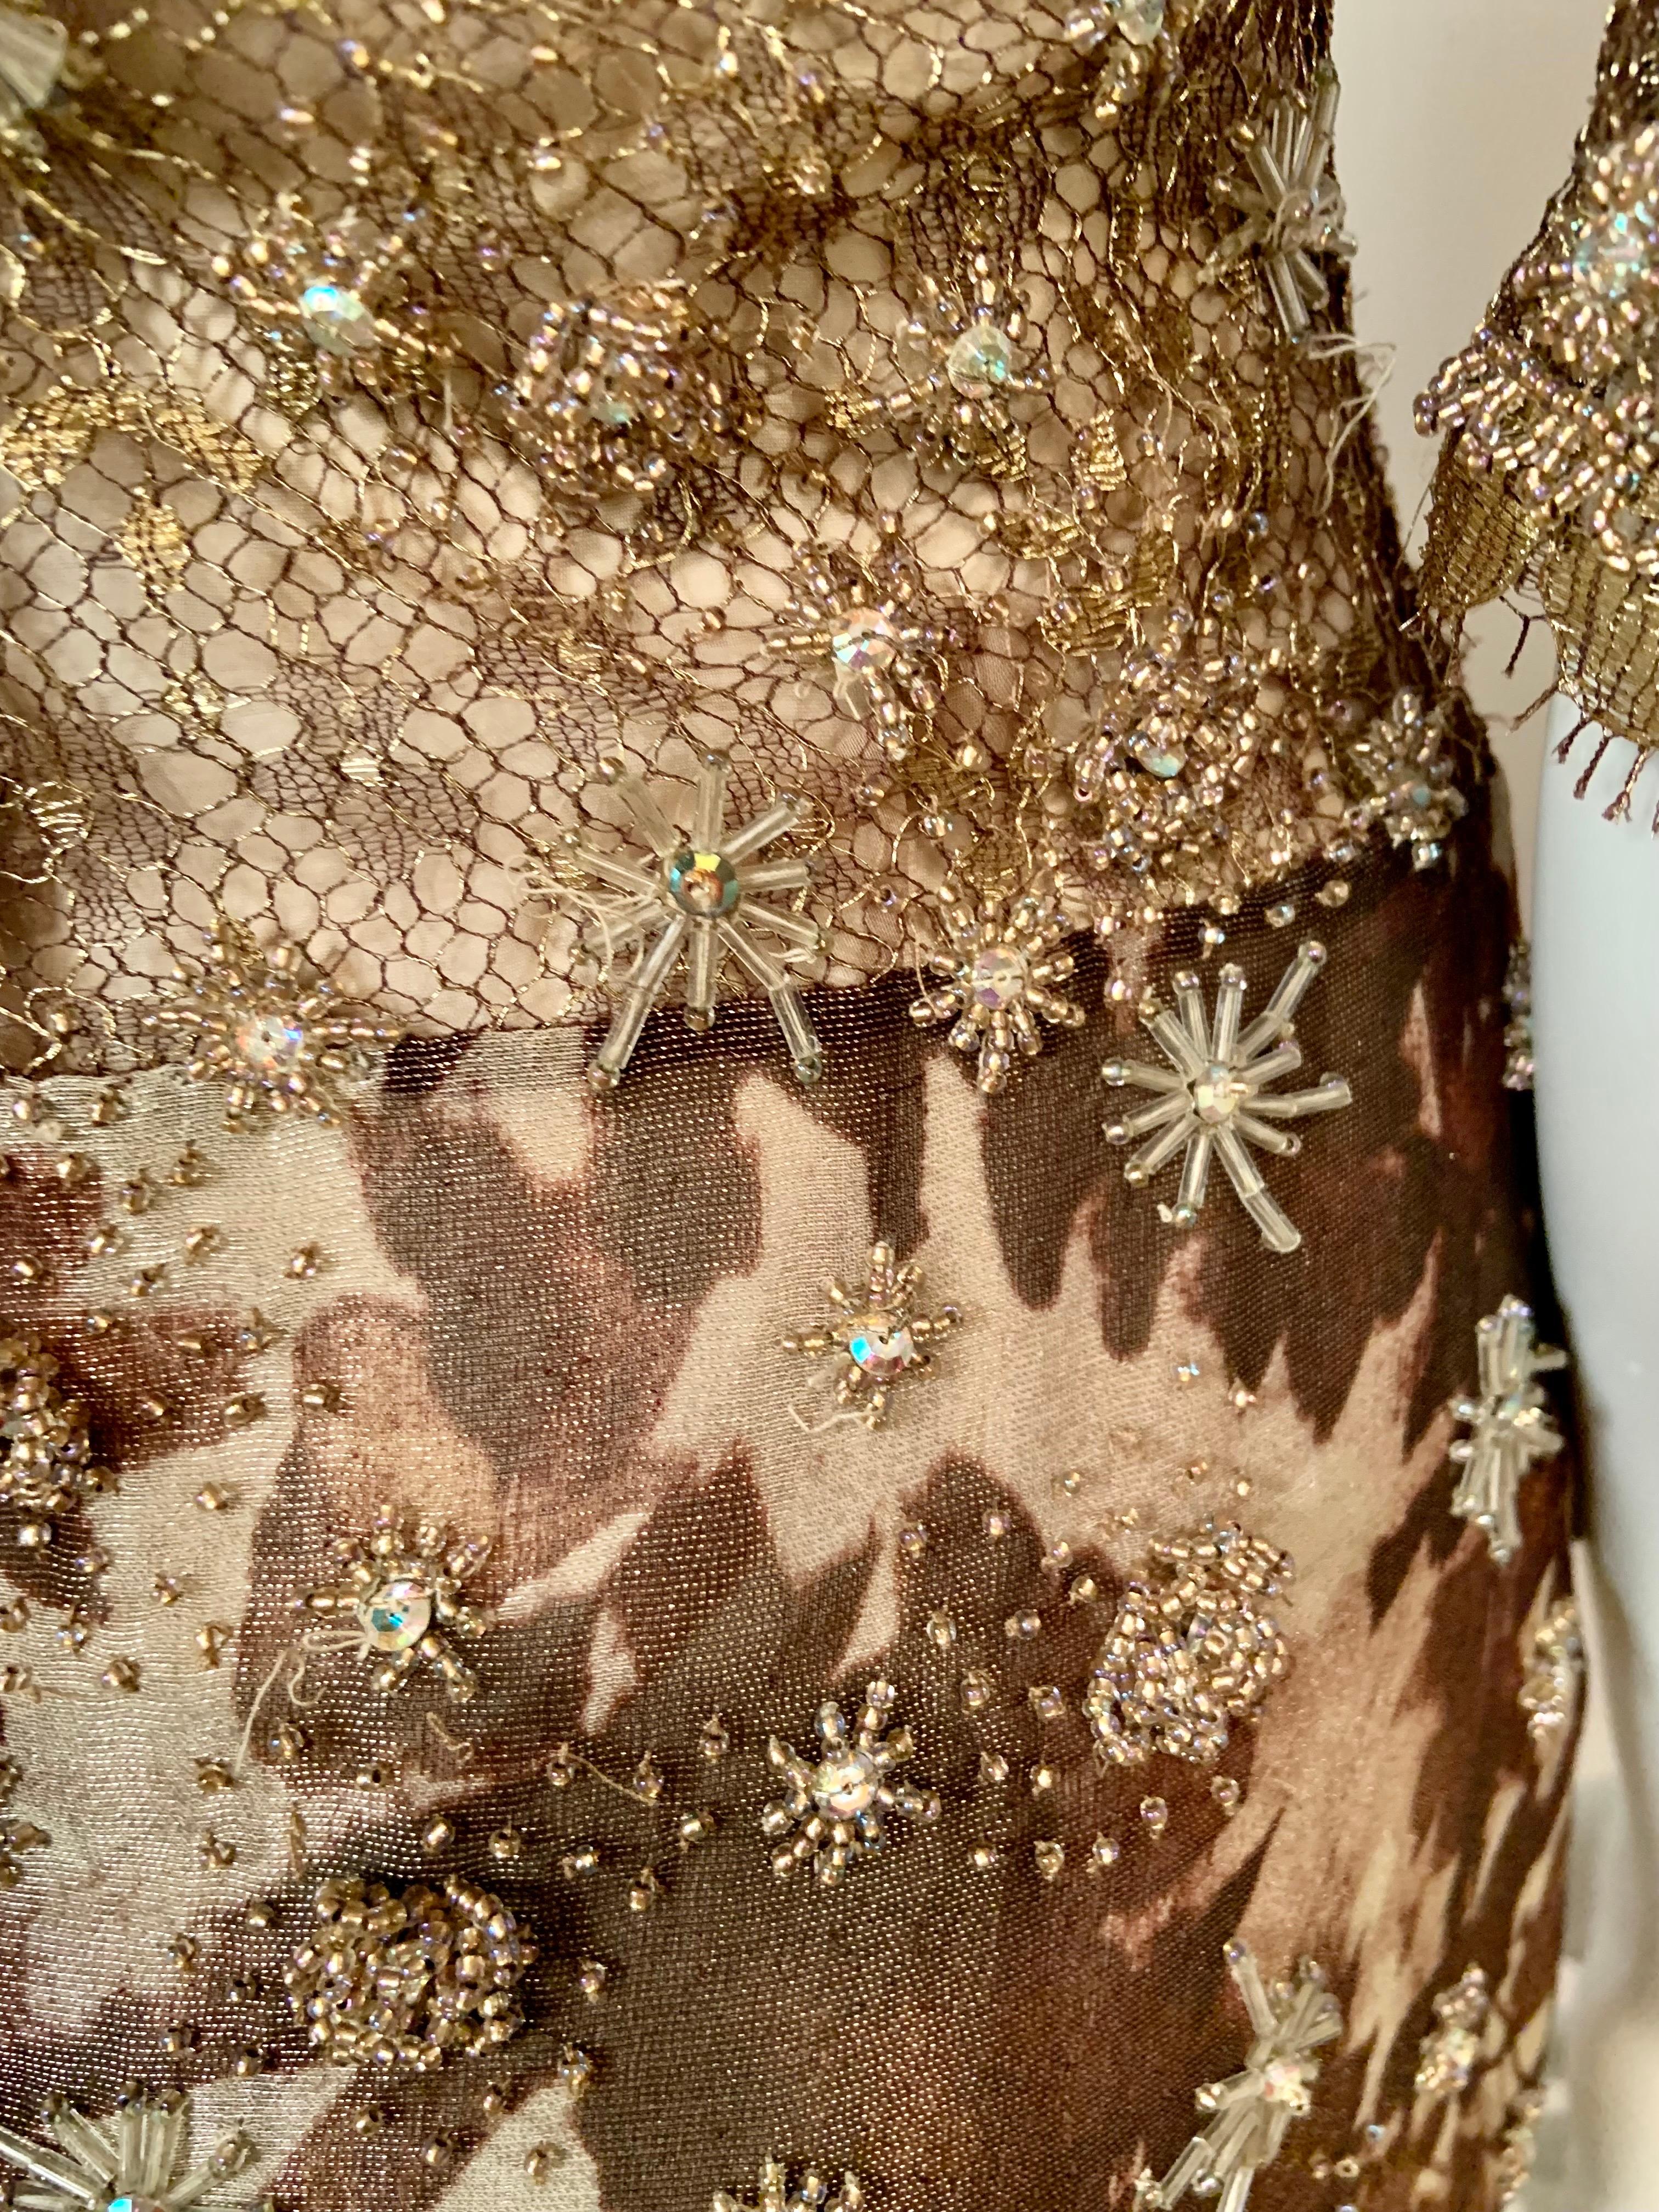 Badgley Mischka Starburst Beaded Gown Gold Lace Top Shimmery Fern Pattern Skirt 8